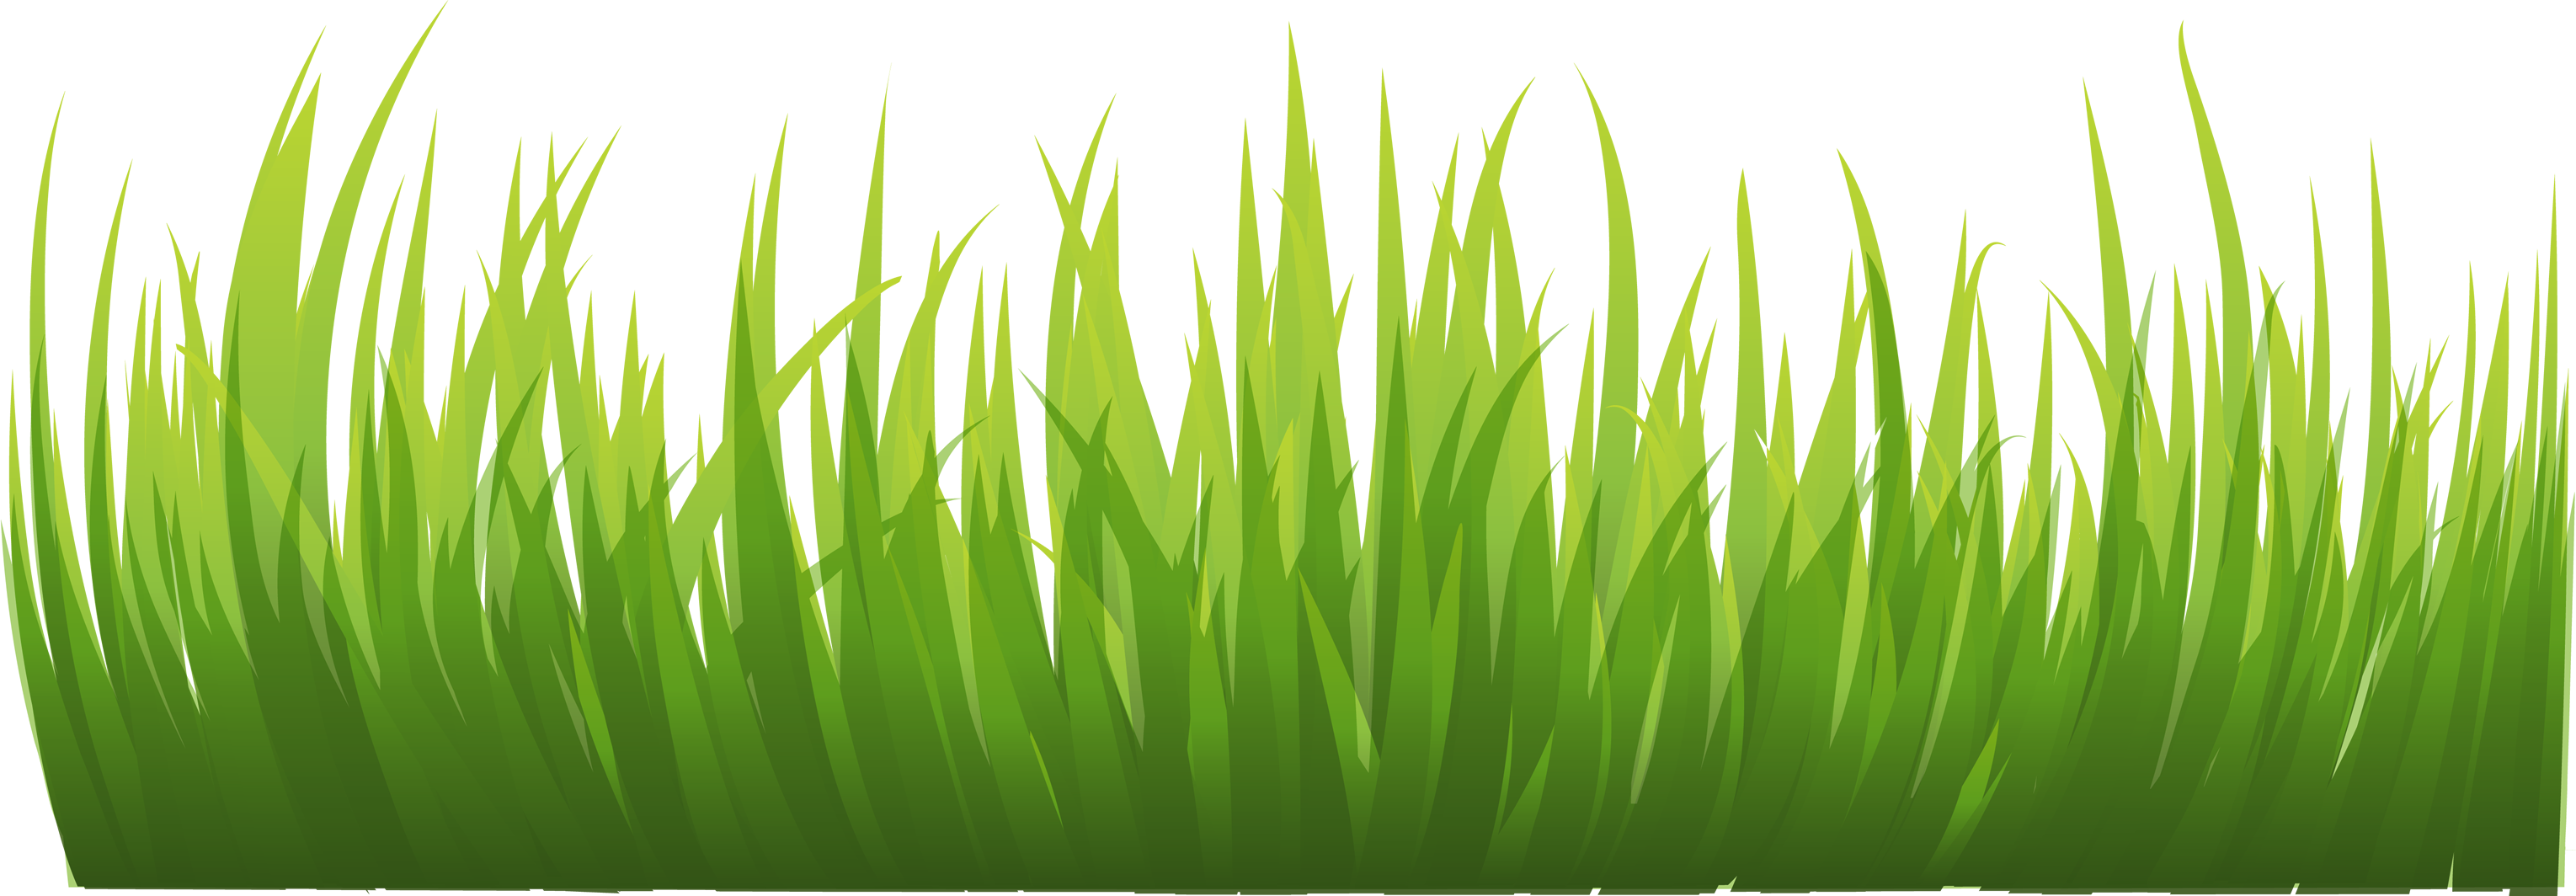 grass png images pictures